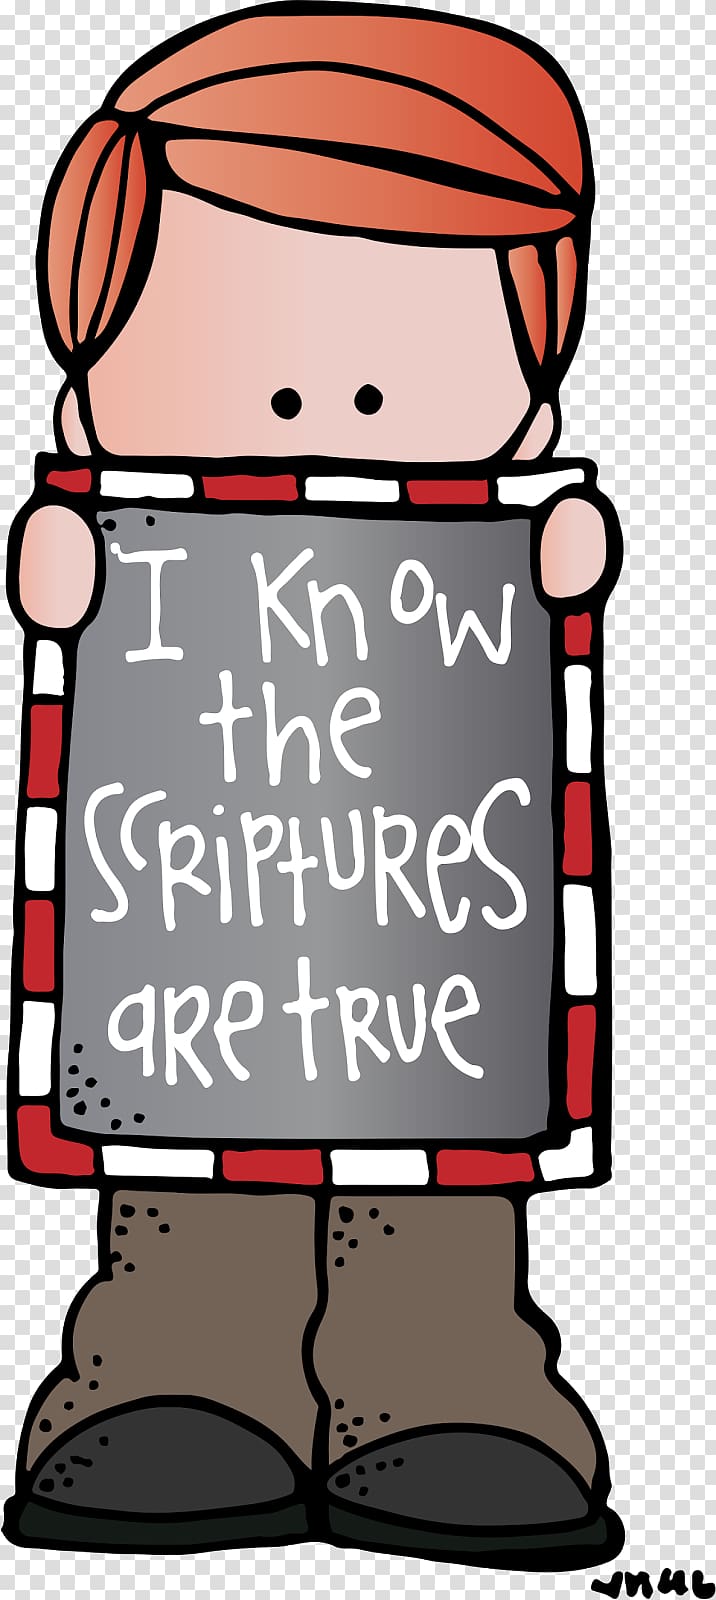 Bible I Know the Scriptures Are True The Church of Jesus Christ of Latter-day Saints , others transparent background PNG clipart